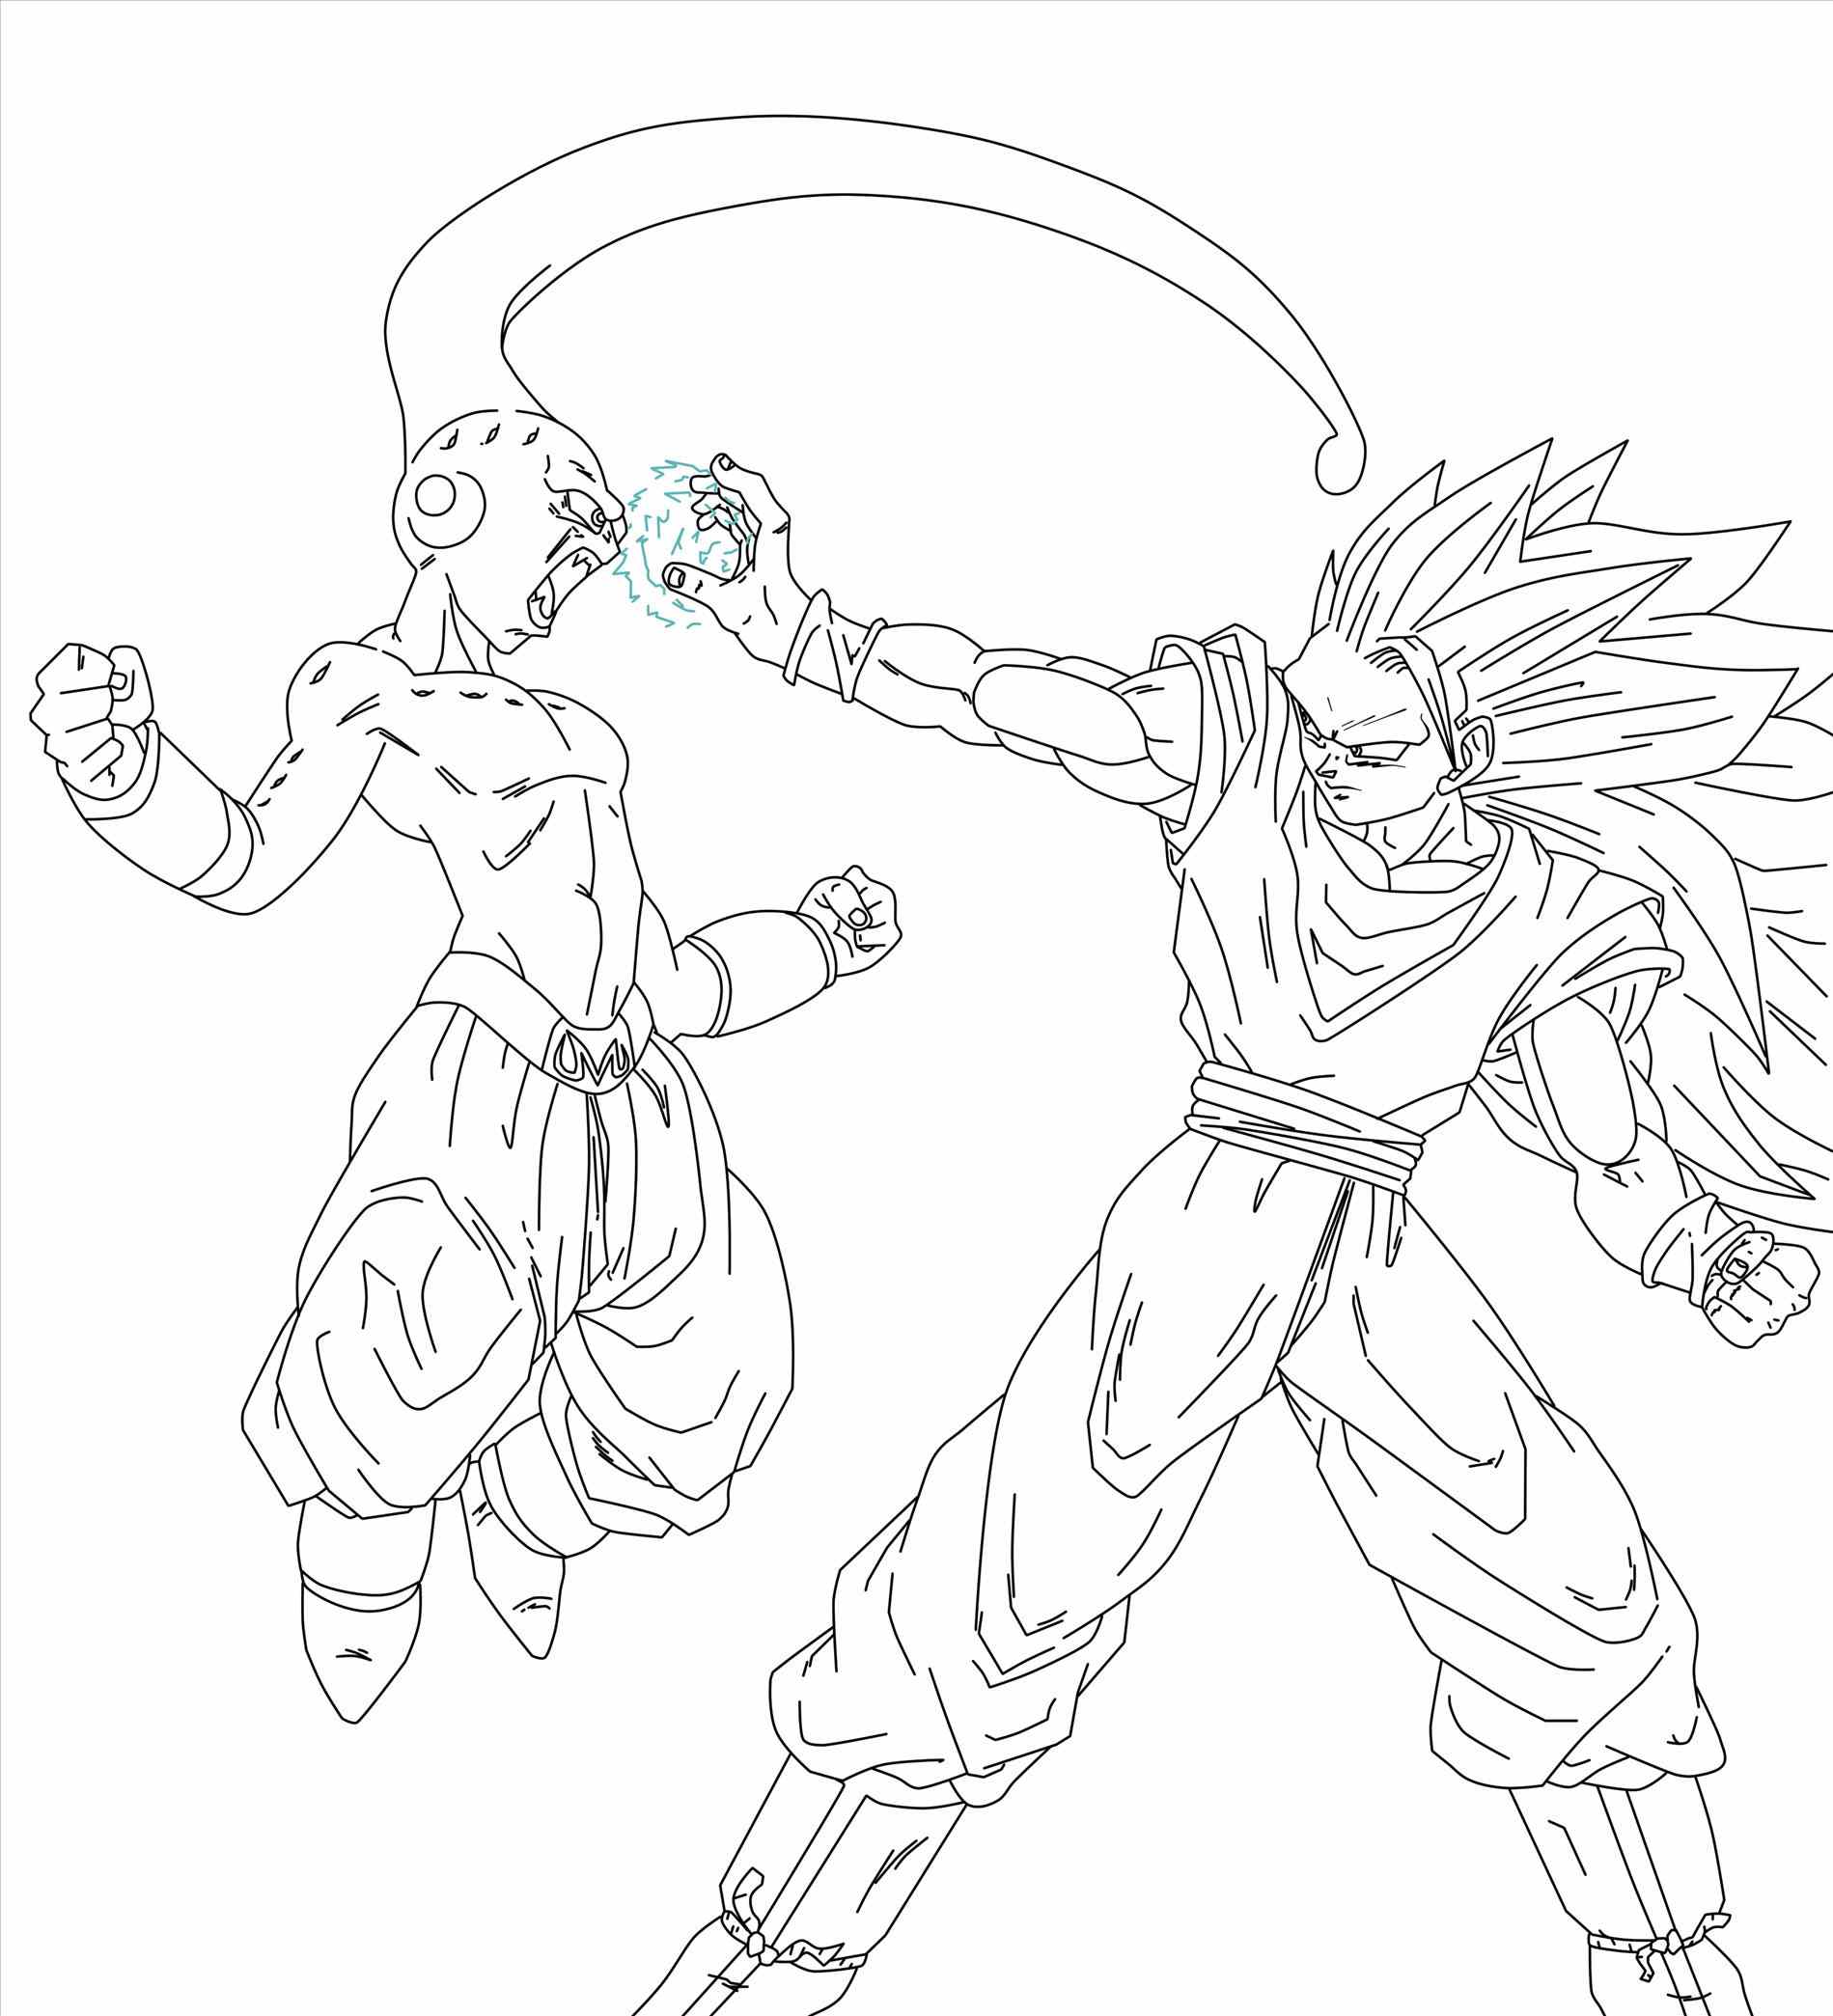 Ssj4 Goku Coloring Pages at GetColorings.com | Free printable colorings